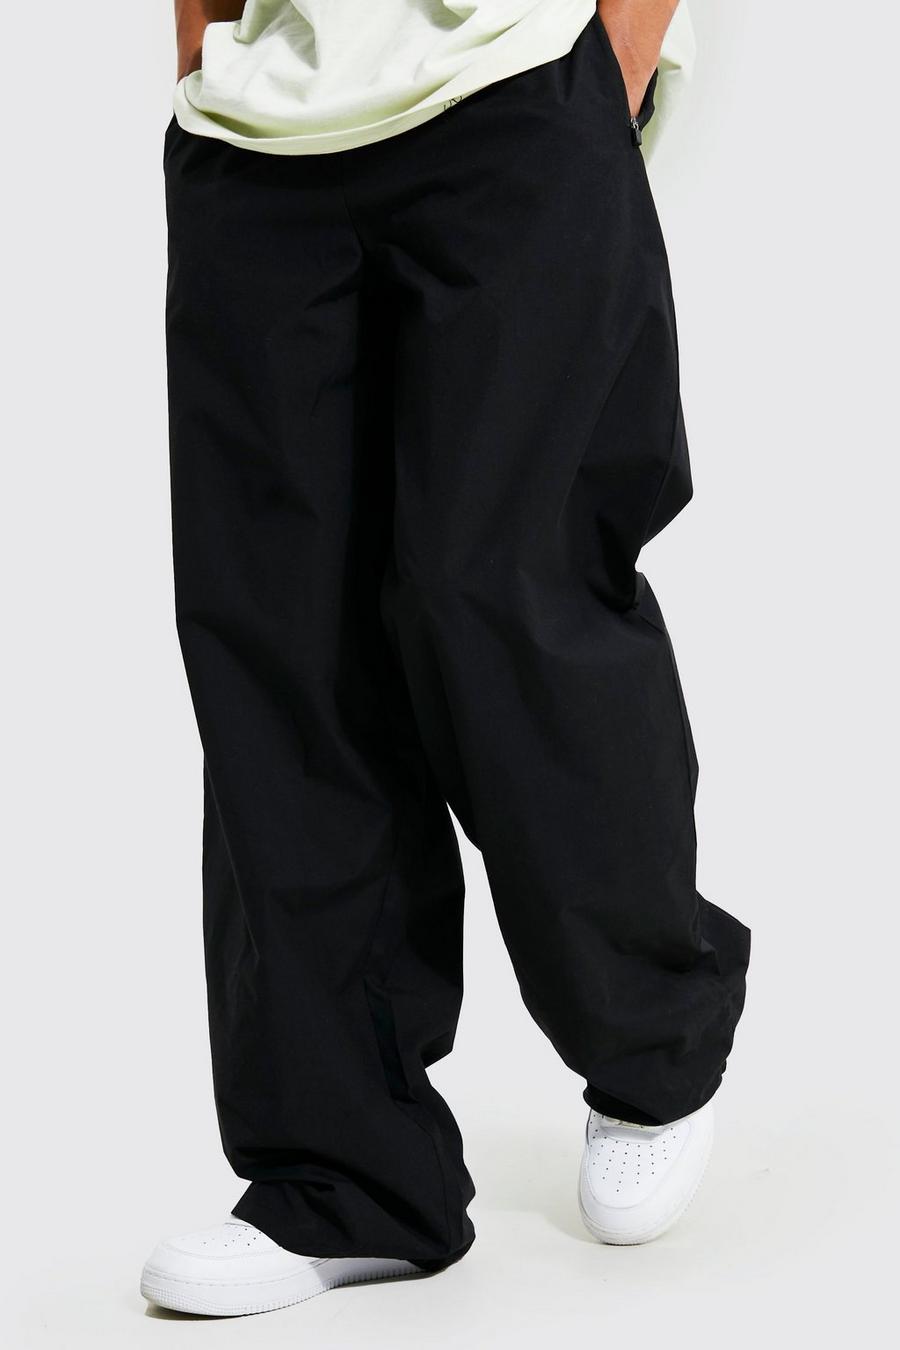 Black noir Tall Extreme Wide Trousers